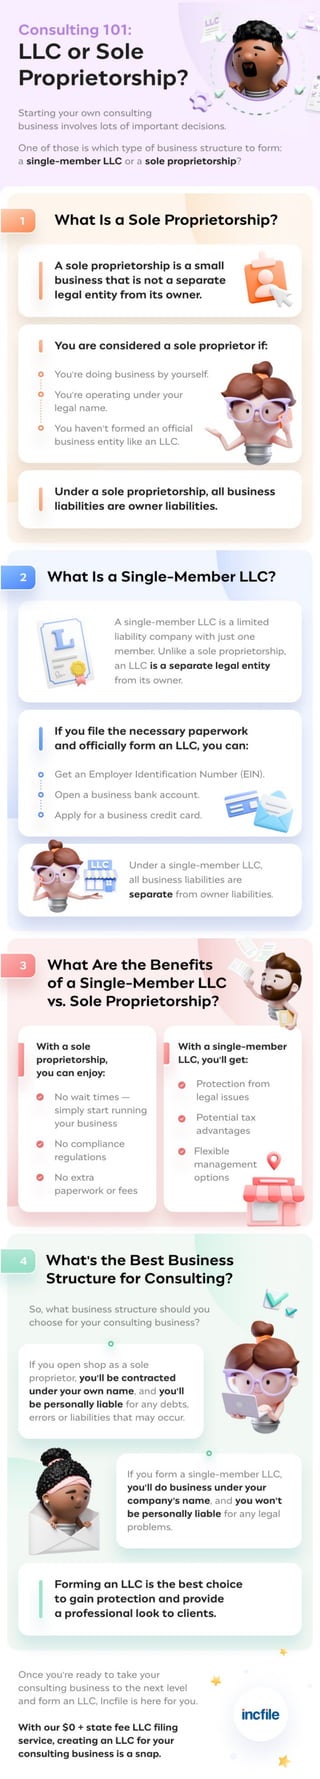 Single-Member LLCs vs. Sole Proprietorships for Your Consulting Business